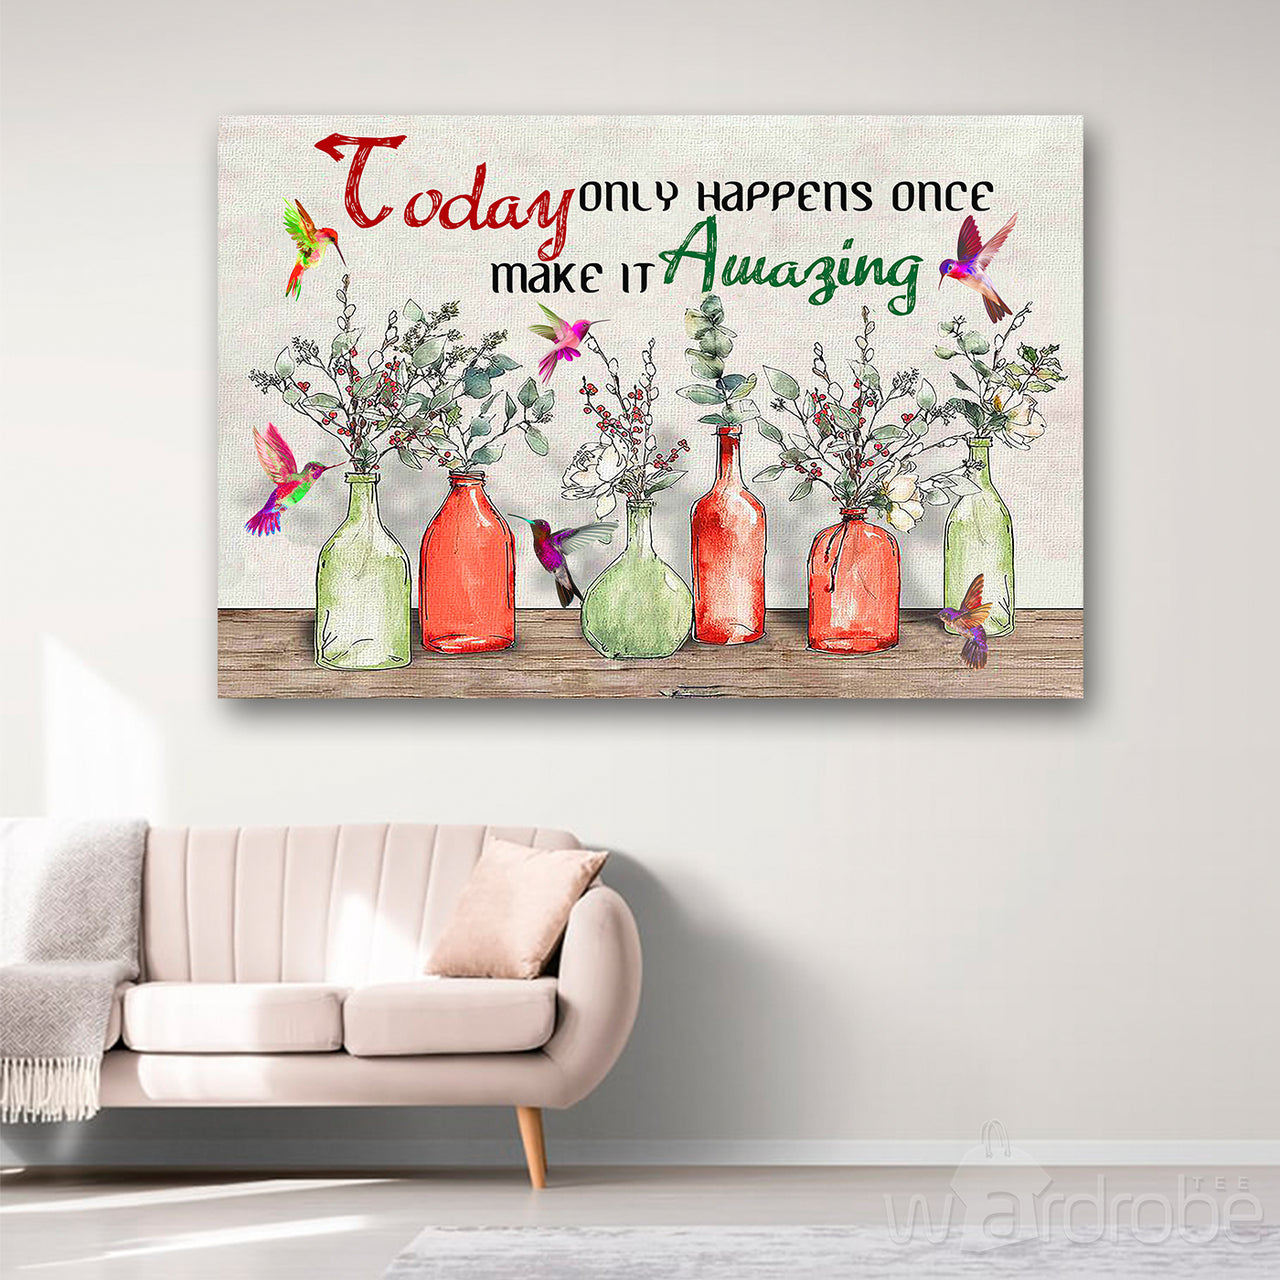 Hummingbird Today Only Happens Once Make It Amazing Canvas Print Wall Art - Matte Canvas